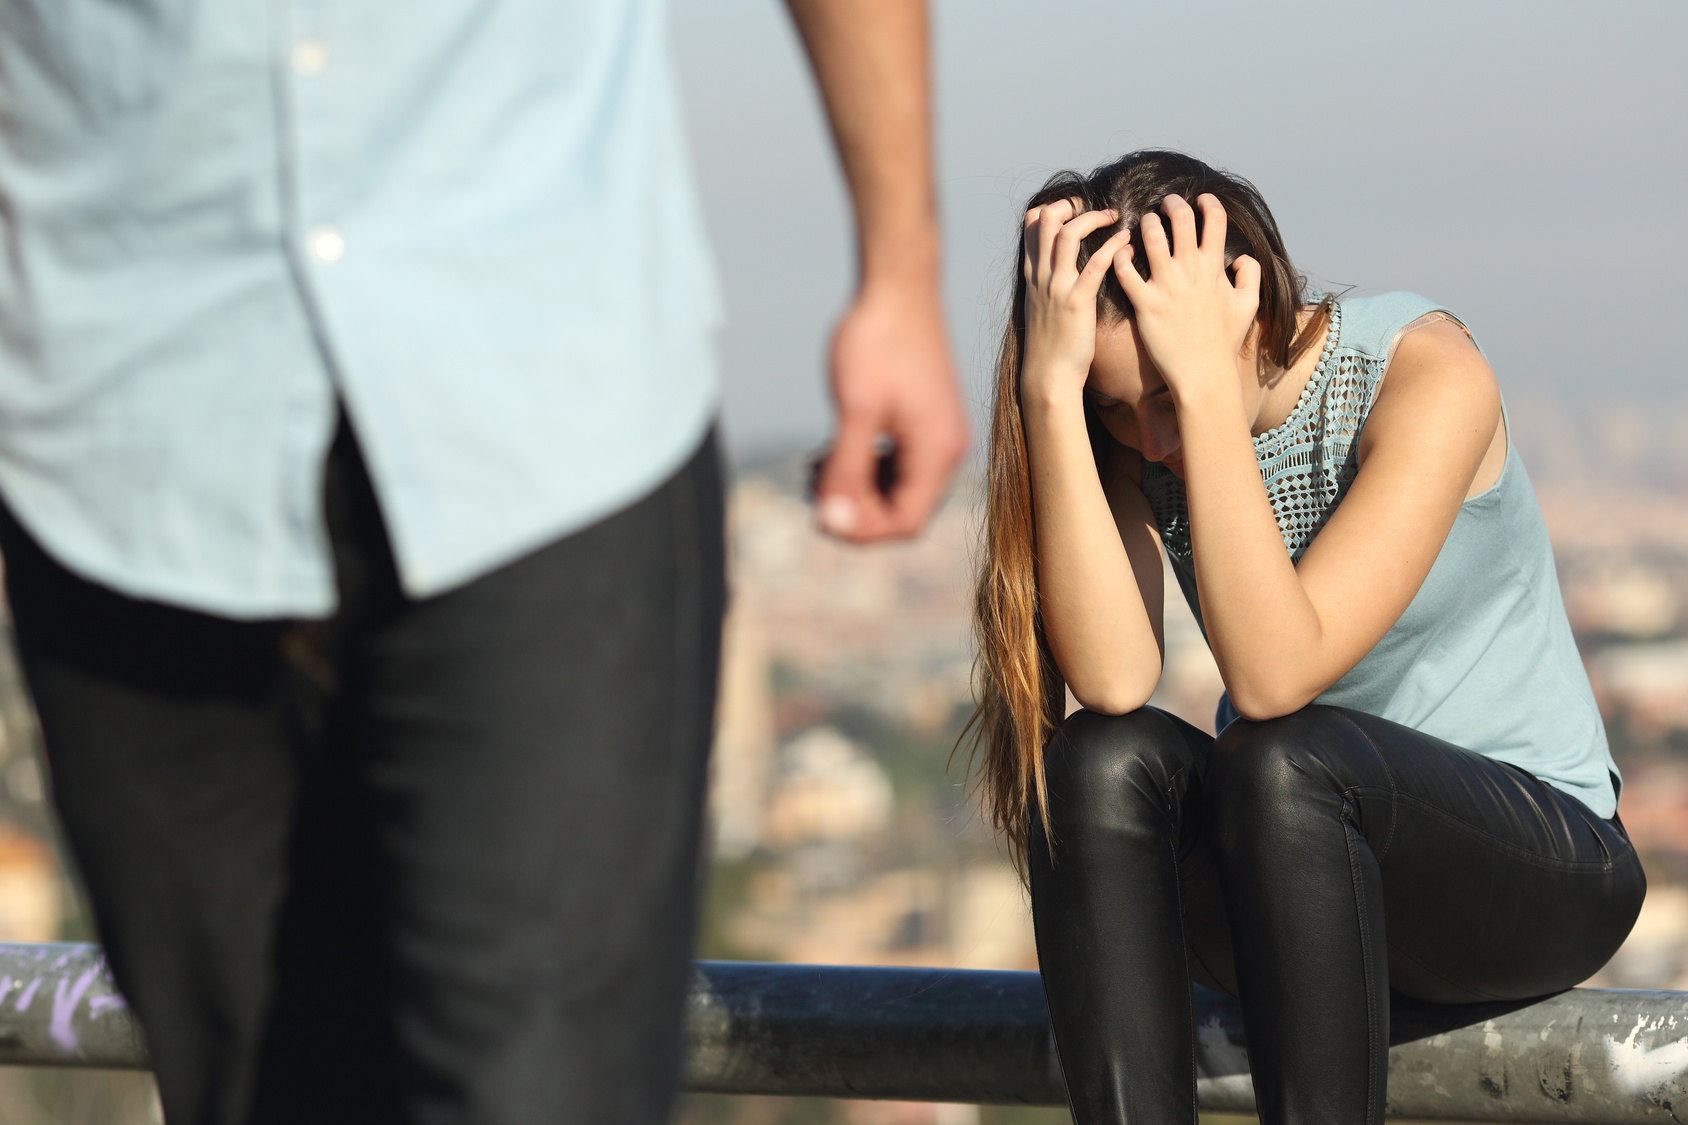 Confessions of a Heartless Dumpee: How to Get Over Your Breakup My Way